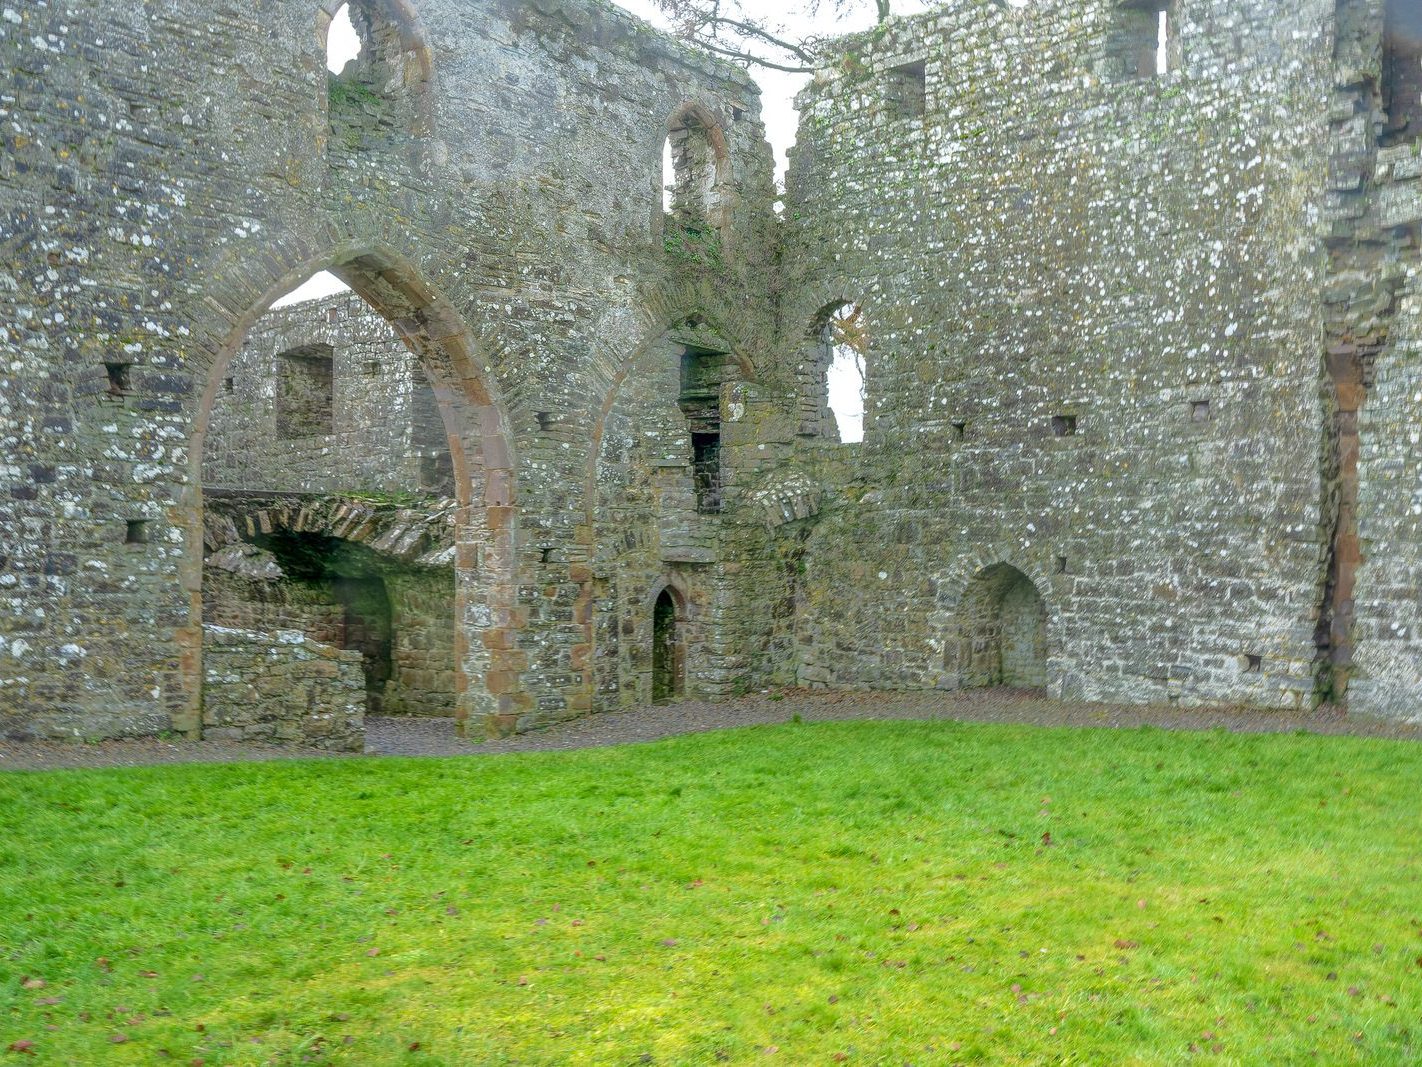 BECTIVE ABBEY WHICH I VISITED LAST CHRISTMAS [THERE WERE NO OTHER VISITORS AS IT WAS A VERY WET DAY]--225240-1